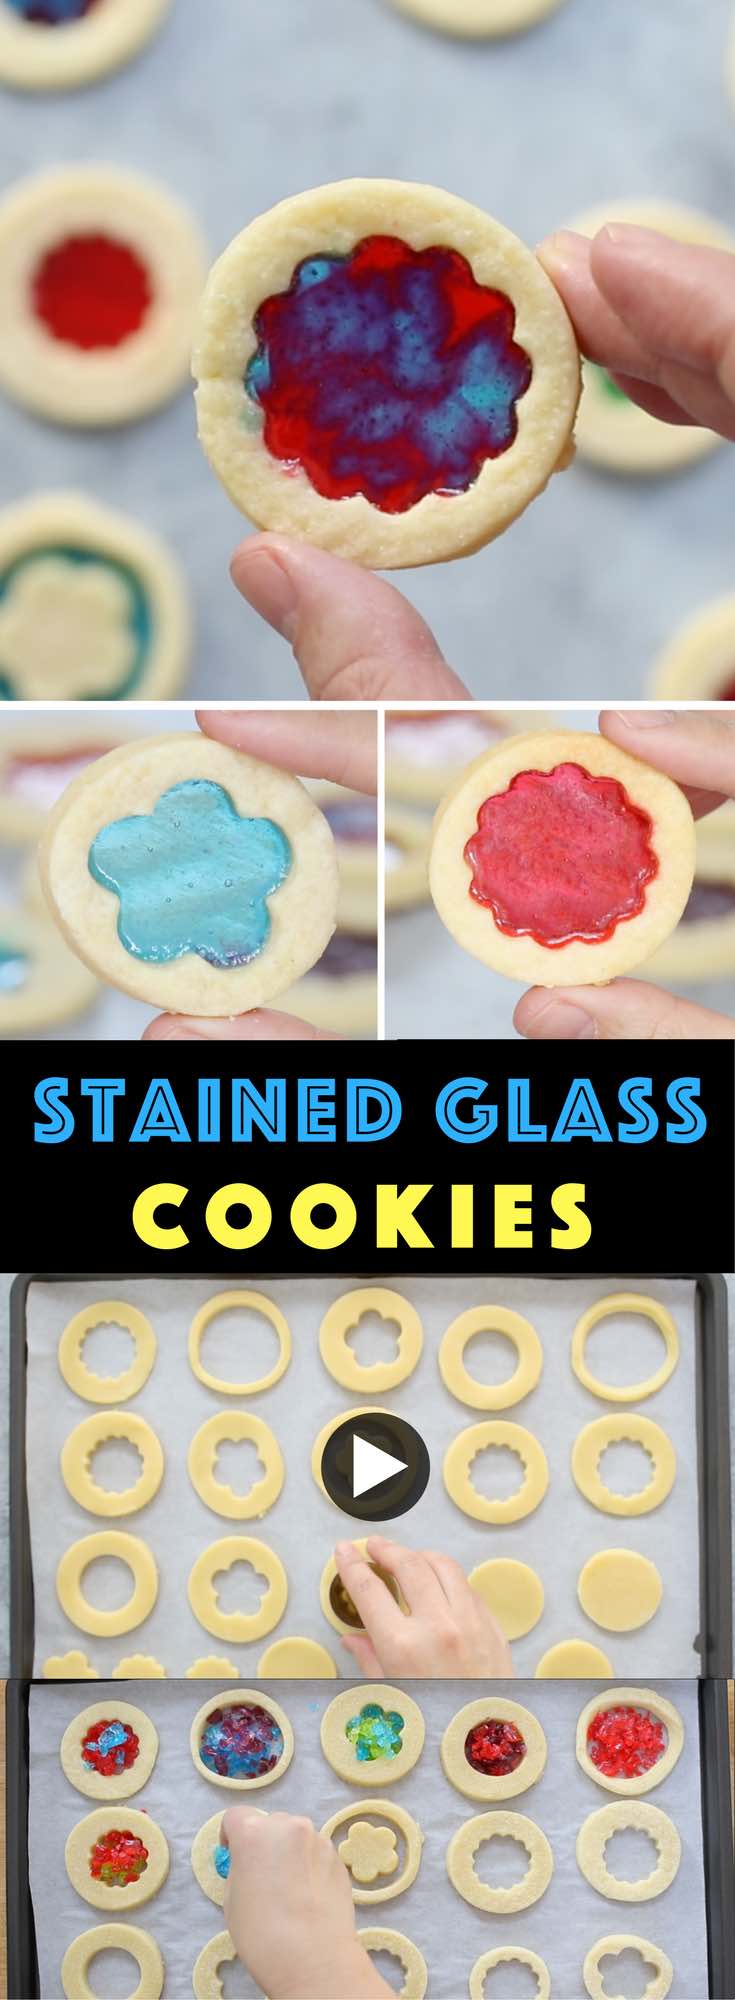 How To Make Stained Glass Cookies – candies melt in the middle of cookies, making beautiful stained glass look! Learn how to make them in this video tutorial. Make your own color and shape combinations! Perfect for holidays, birthdays and gifts. video recipe. | Tipbuzz.com